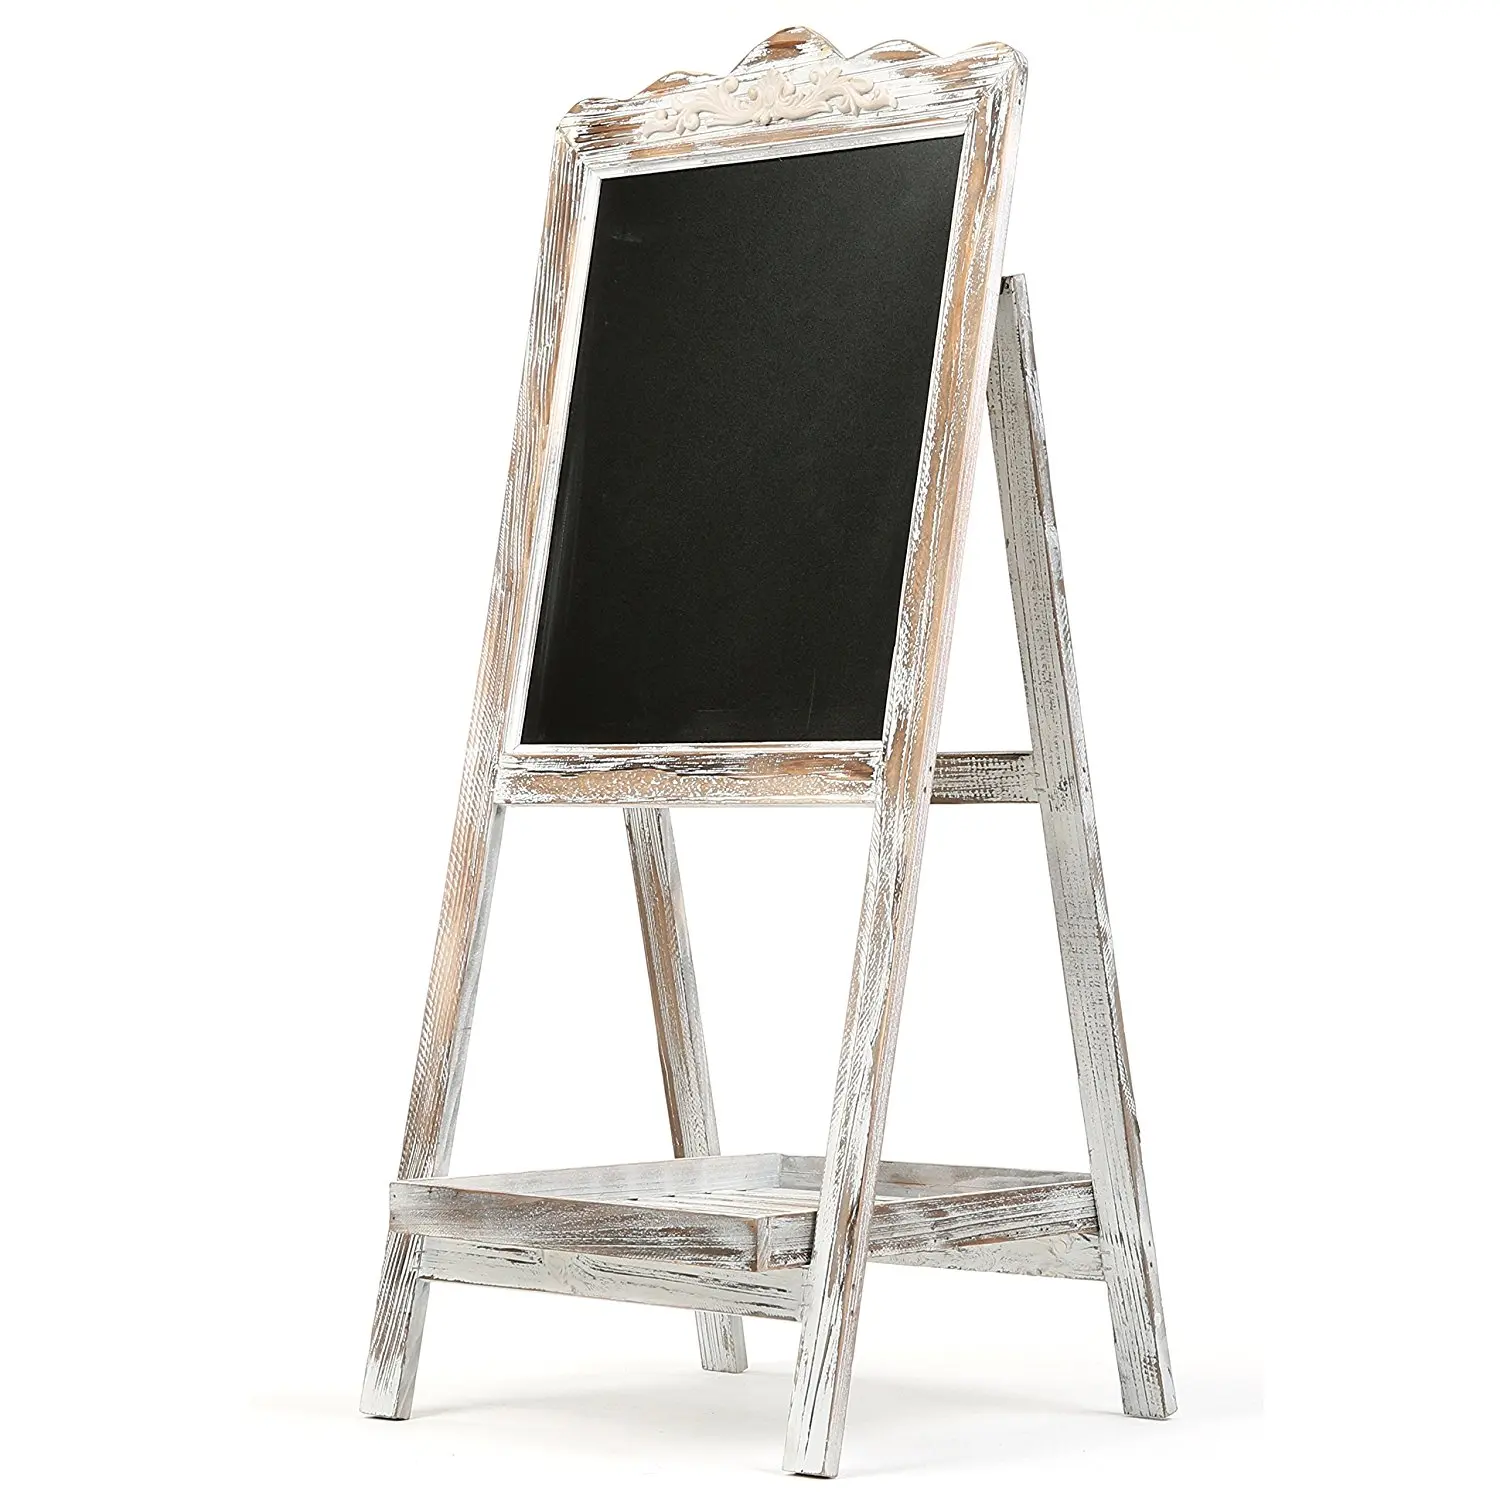 Vintage Stand Shabby Rustic Wood Kid Easel Chalkboard White Washed